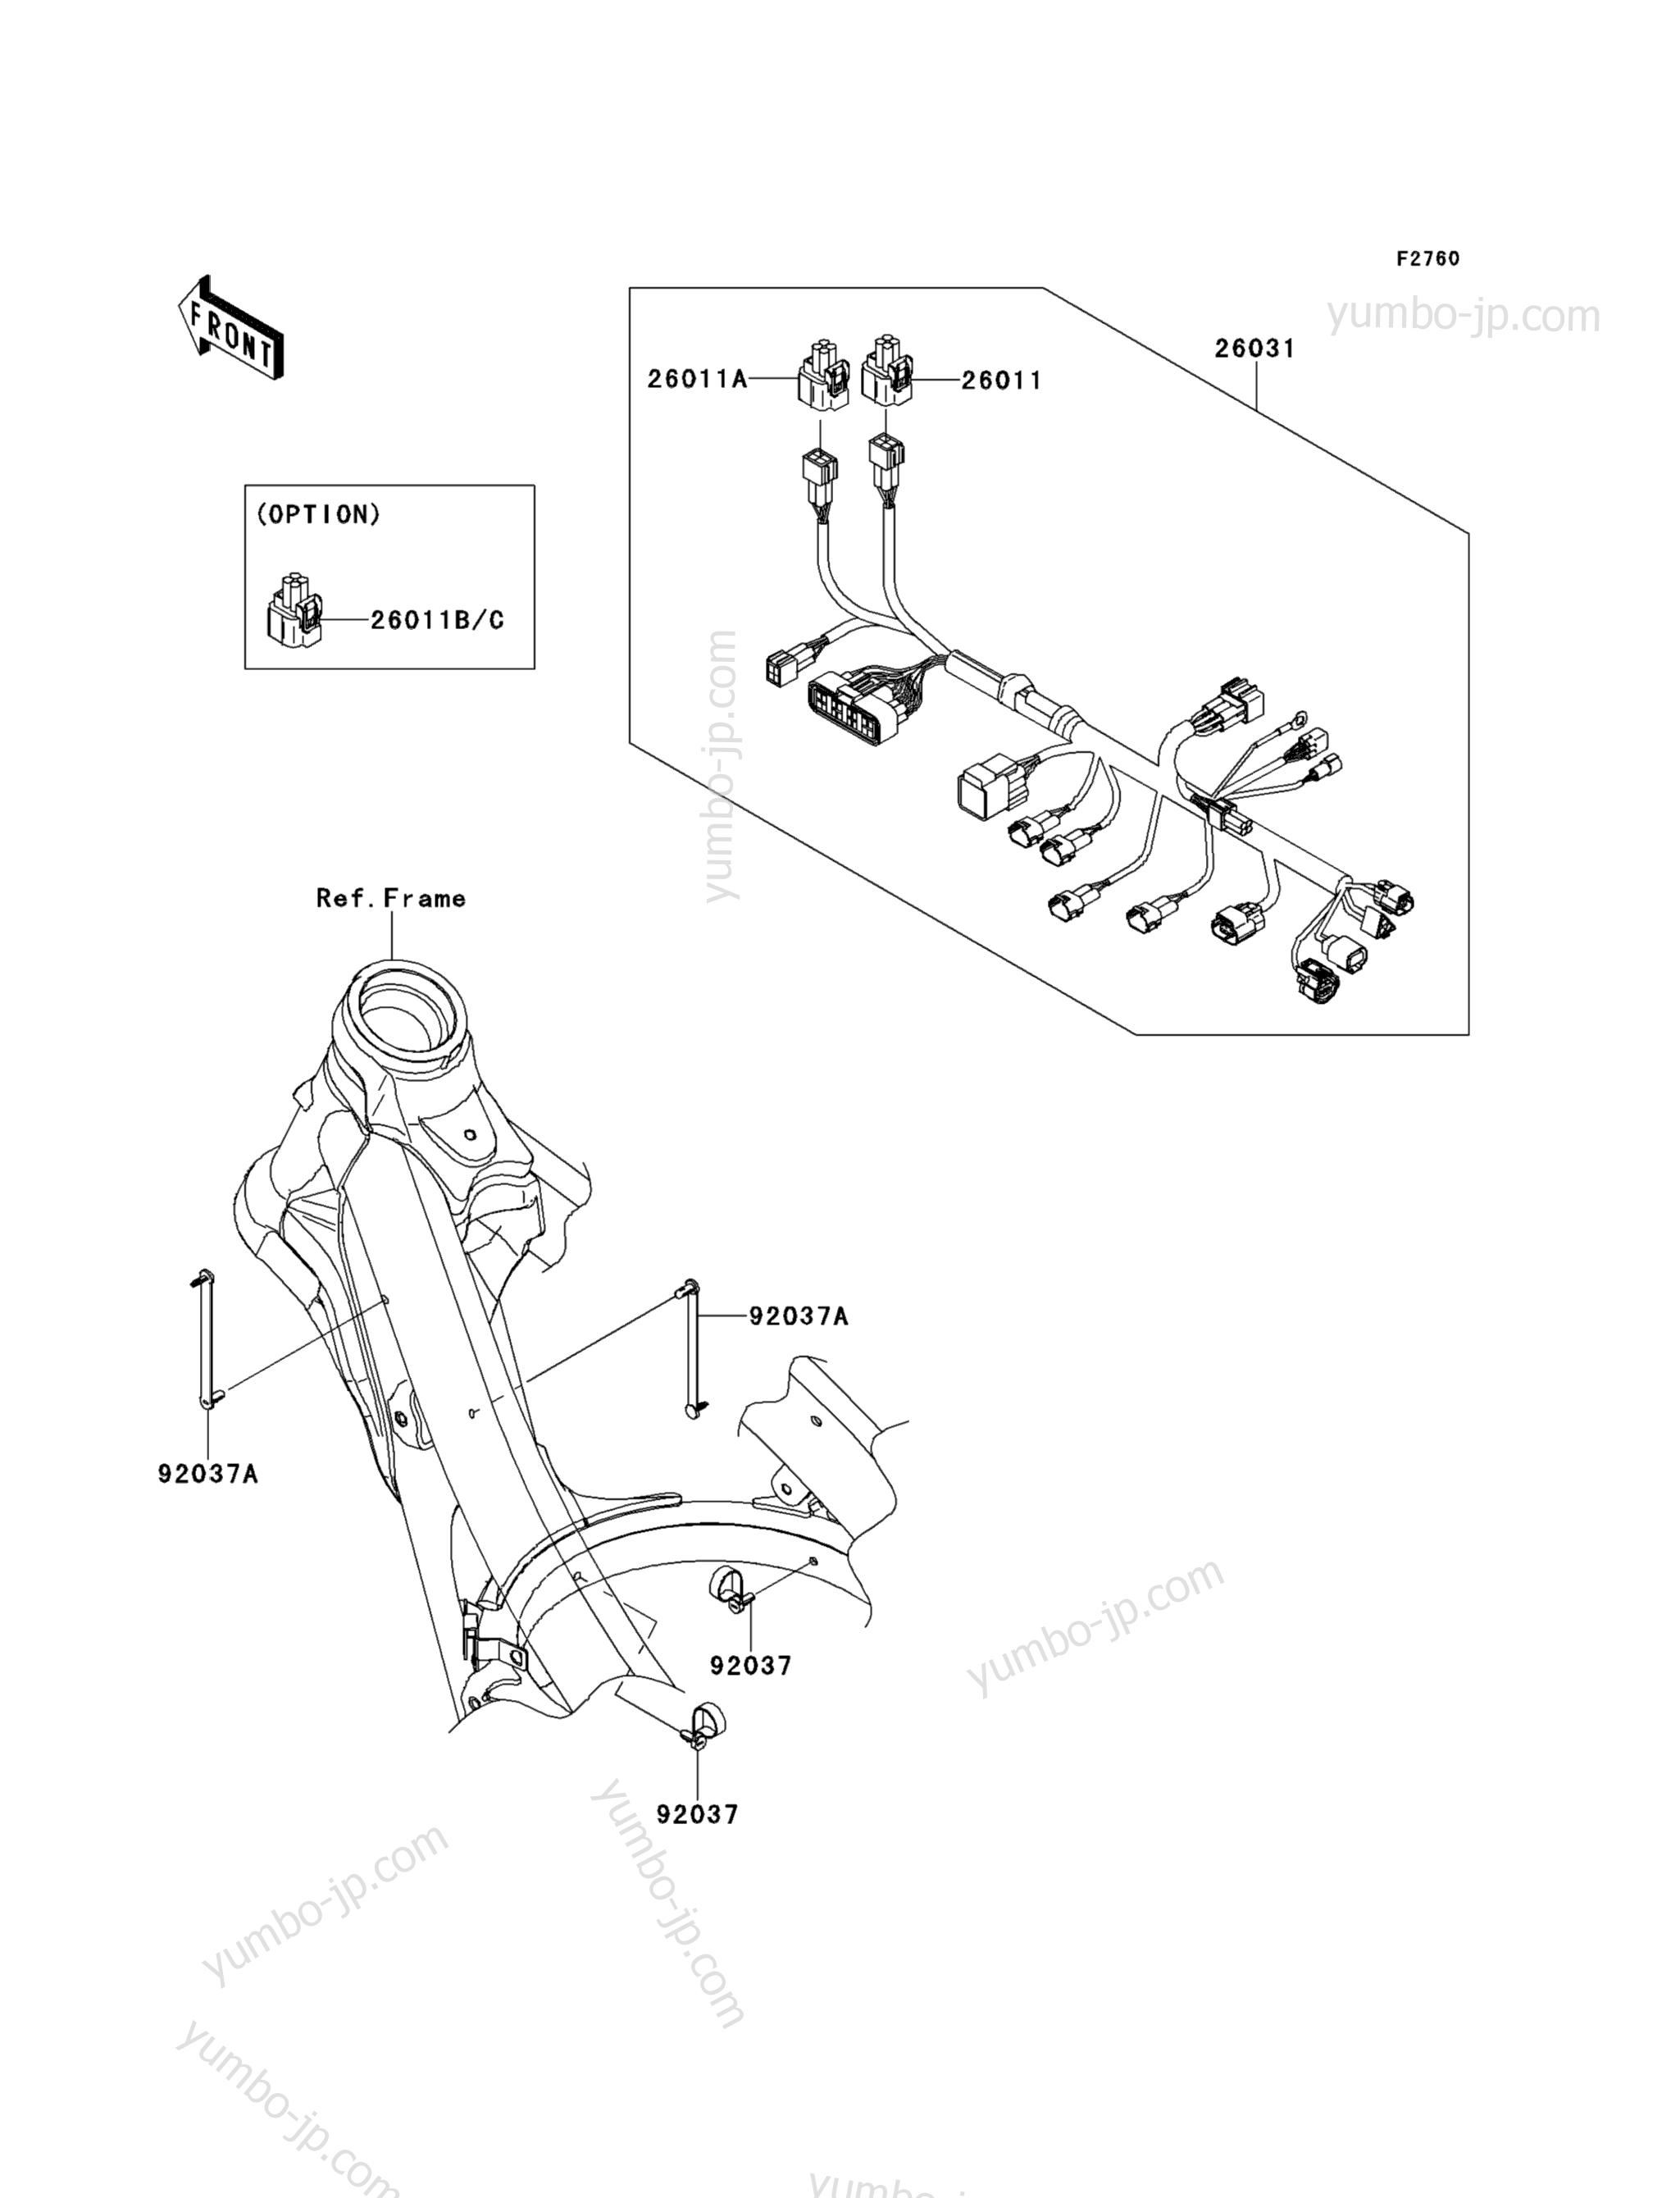 CHASSIS ELECTRICAL EQUIPMENT for motorcycles KAWASAKI KX450F (KX450FCF) 2012 year